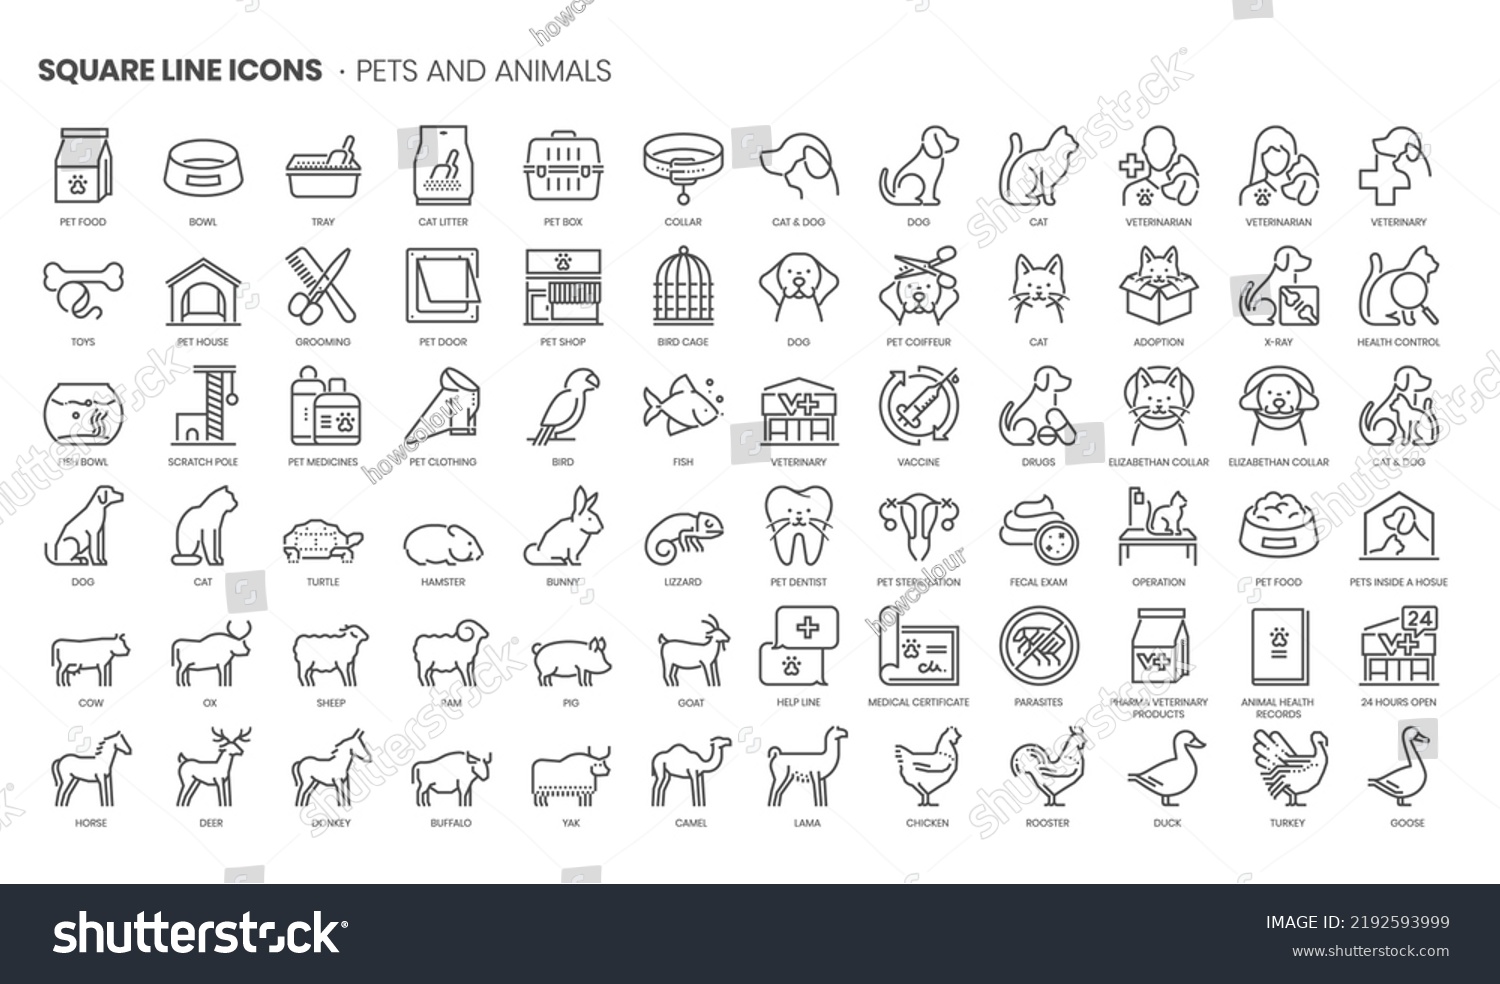 SVG of Pets and animals related, pixel perfect, editable stroke, up scalable square line vector icon set.  svg